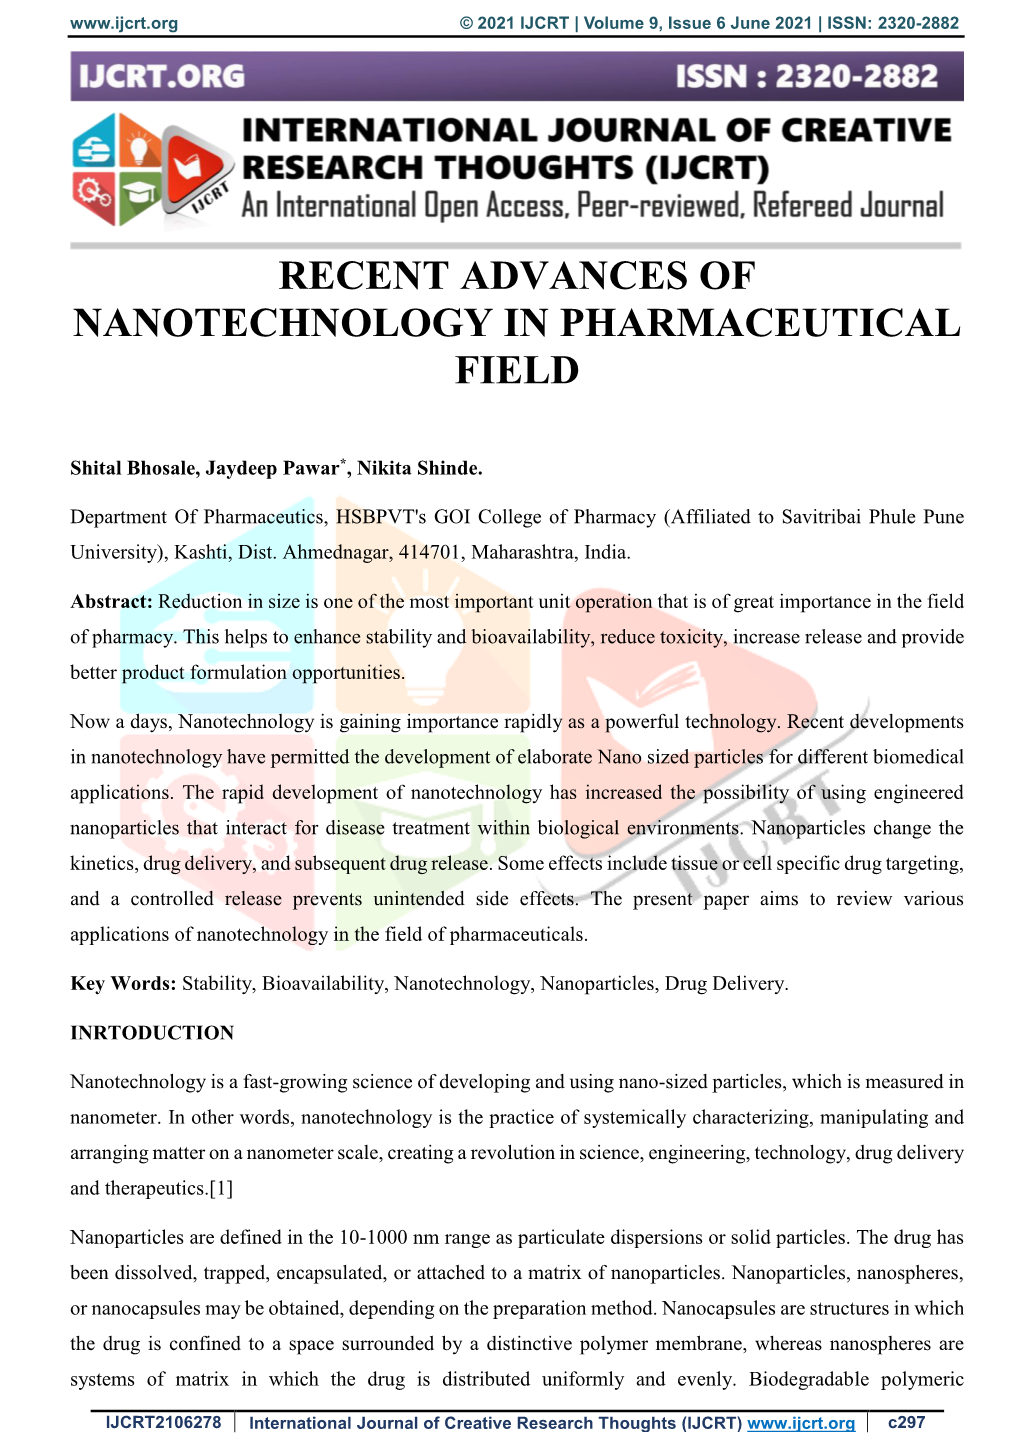 Recent Advances of Nanotechnology in Pharmaceutical Field